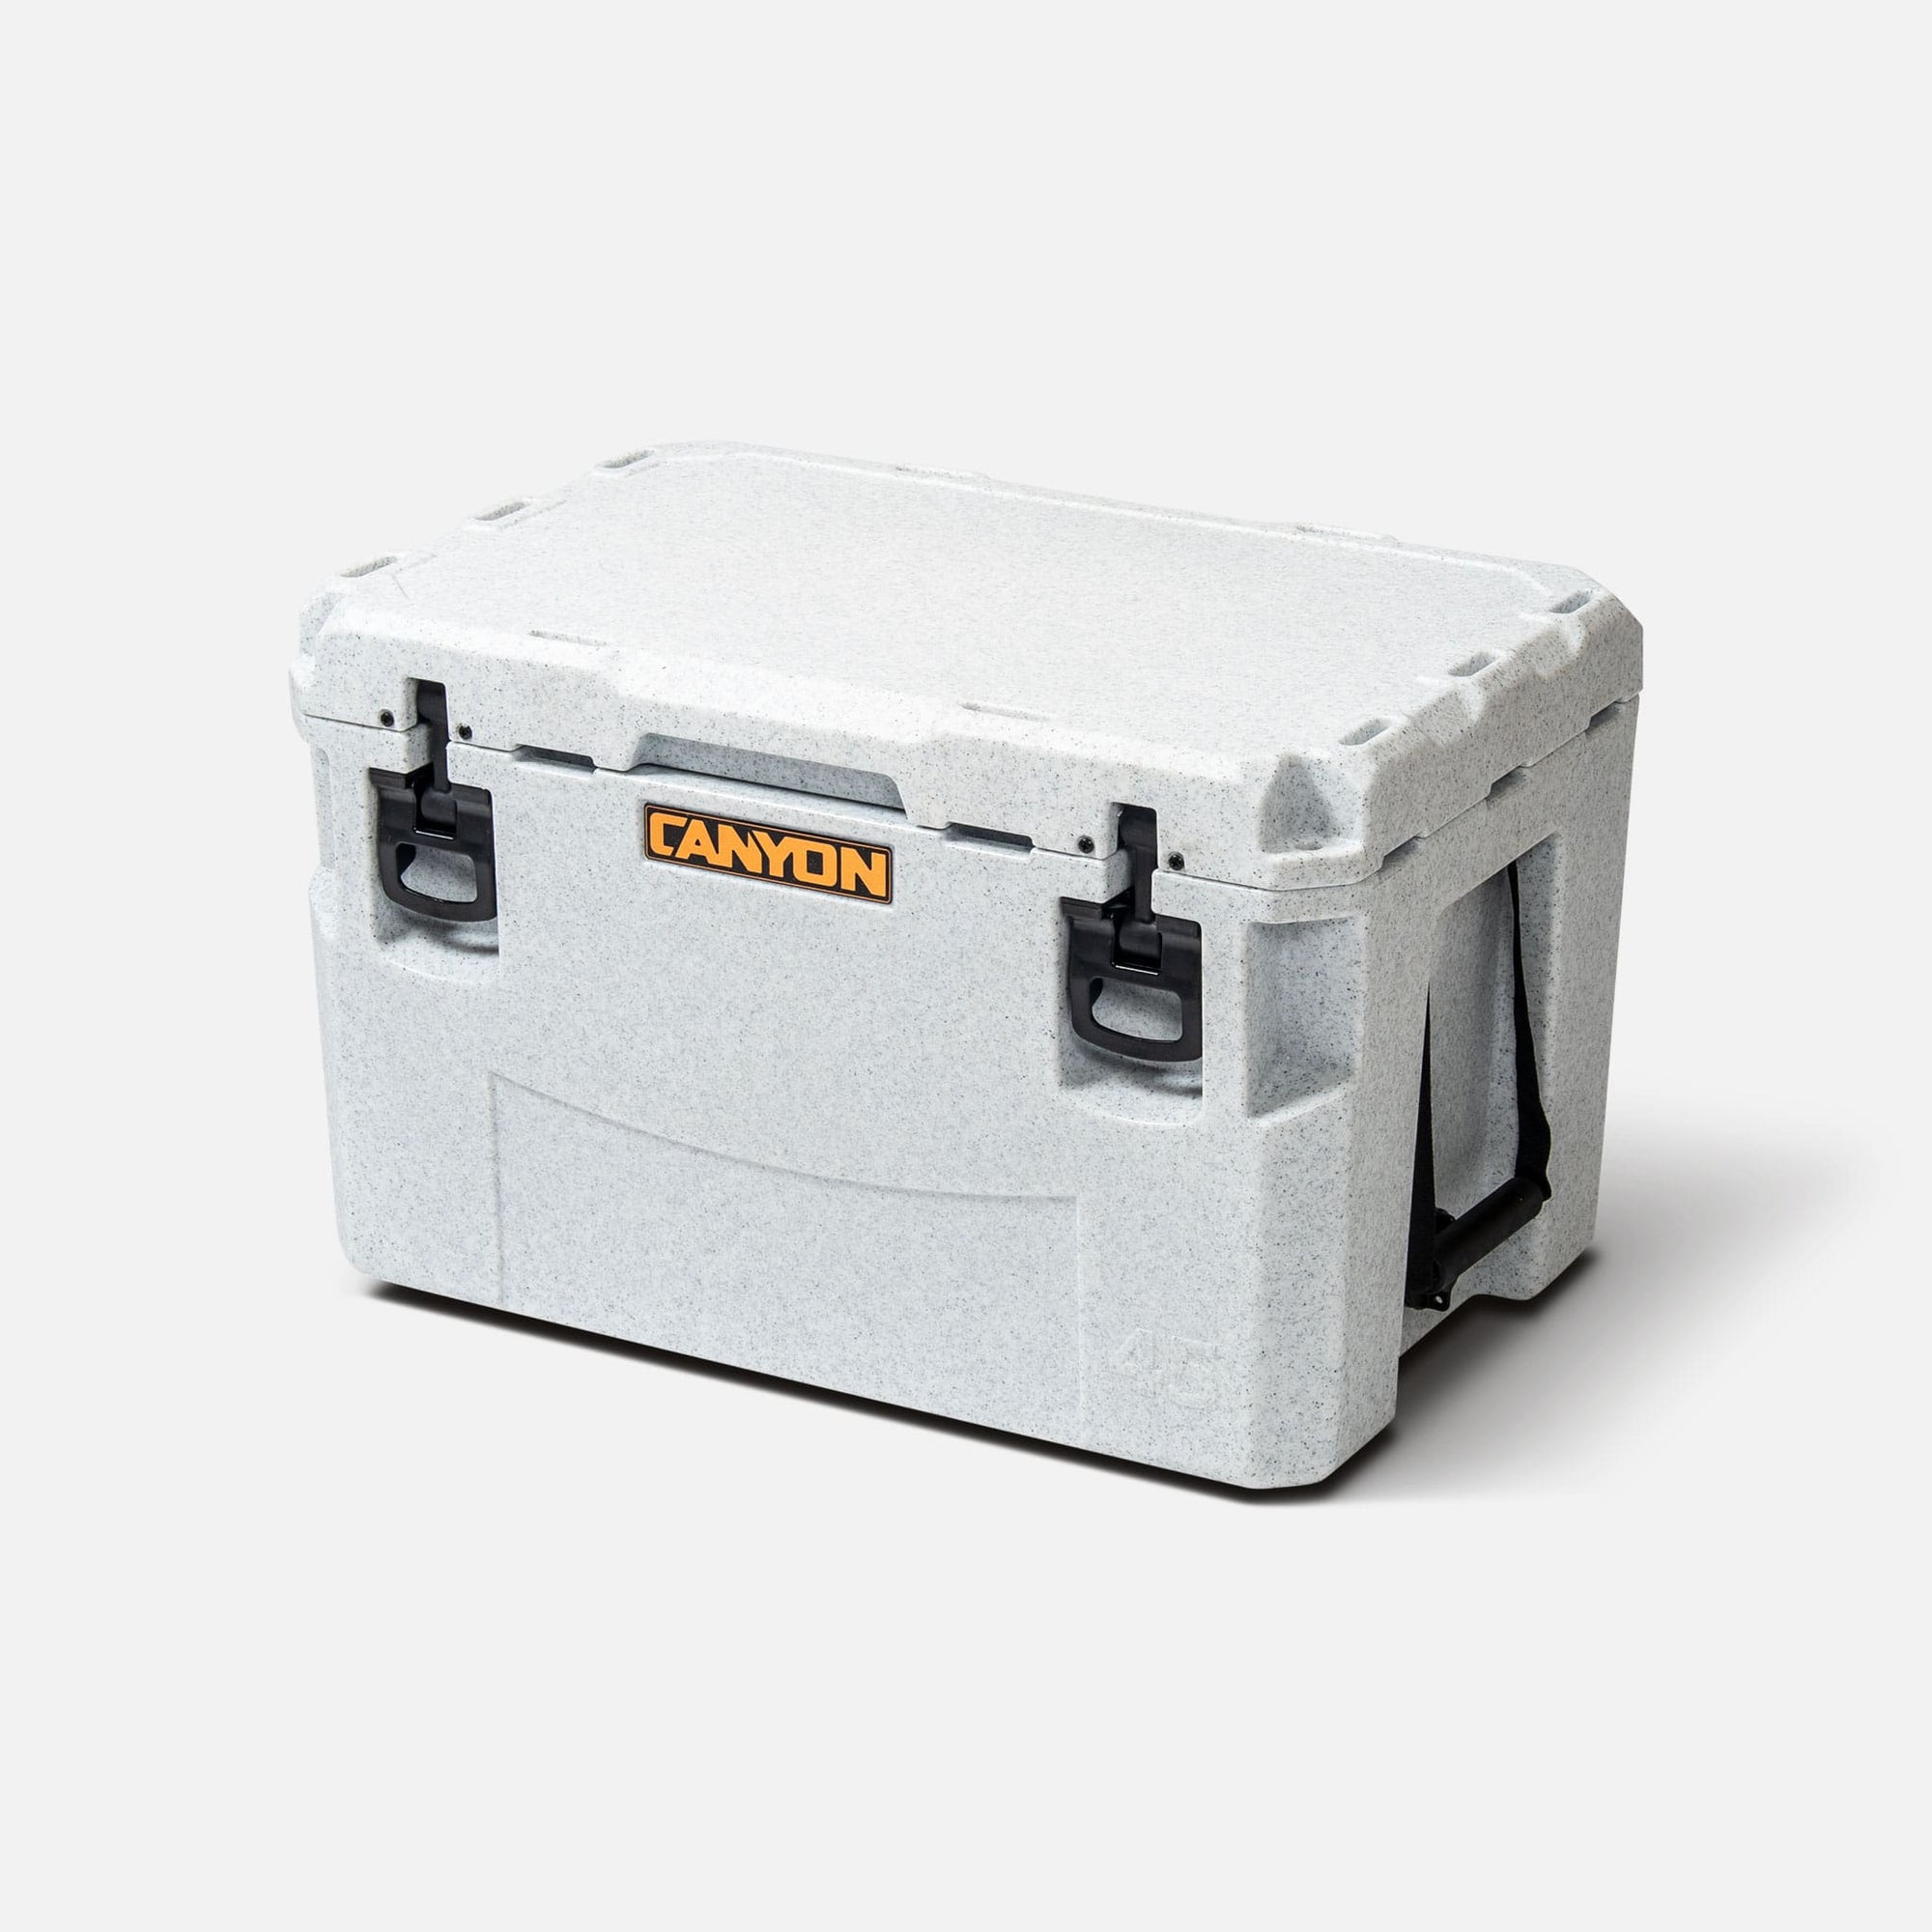 https://canyoncoolers.com/cdn/shop/products/Canyon_Coolers_Pro_45_White_Marble_Closed_Perspective-min_2000x.jpg?v=1699560357